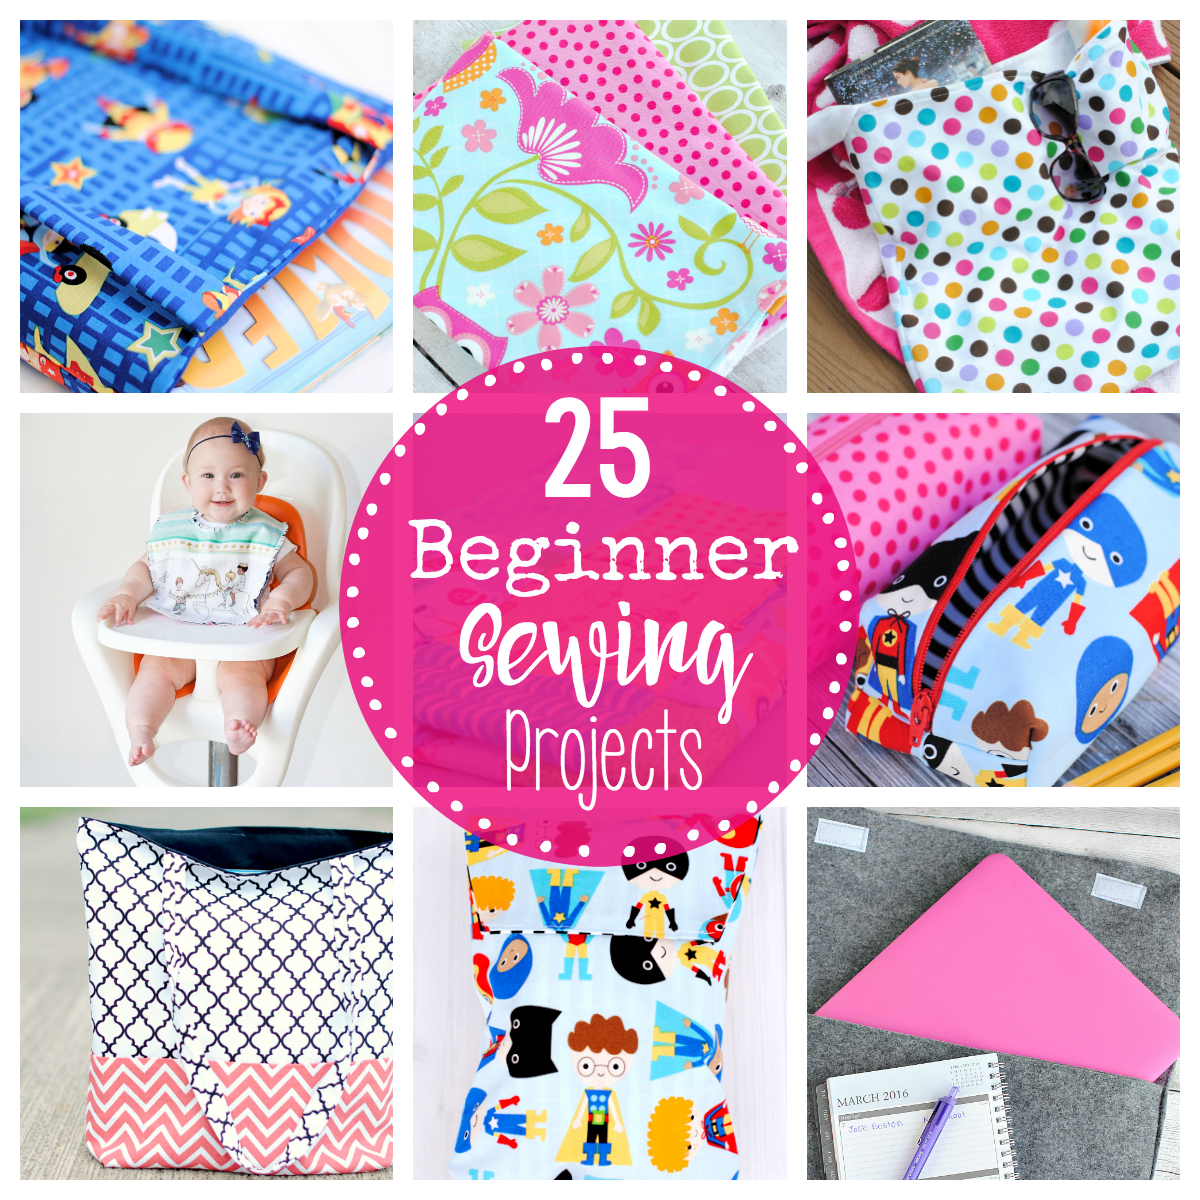 Easy Sewing Patterns For Beginners 25 Beginner Sewing Projects